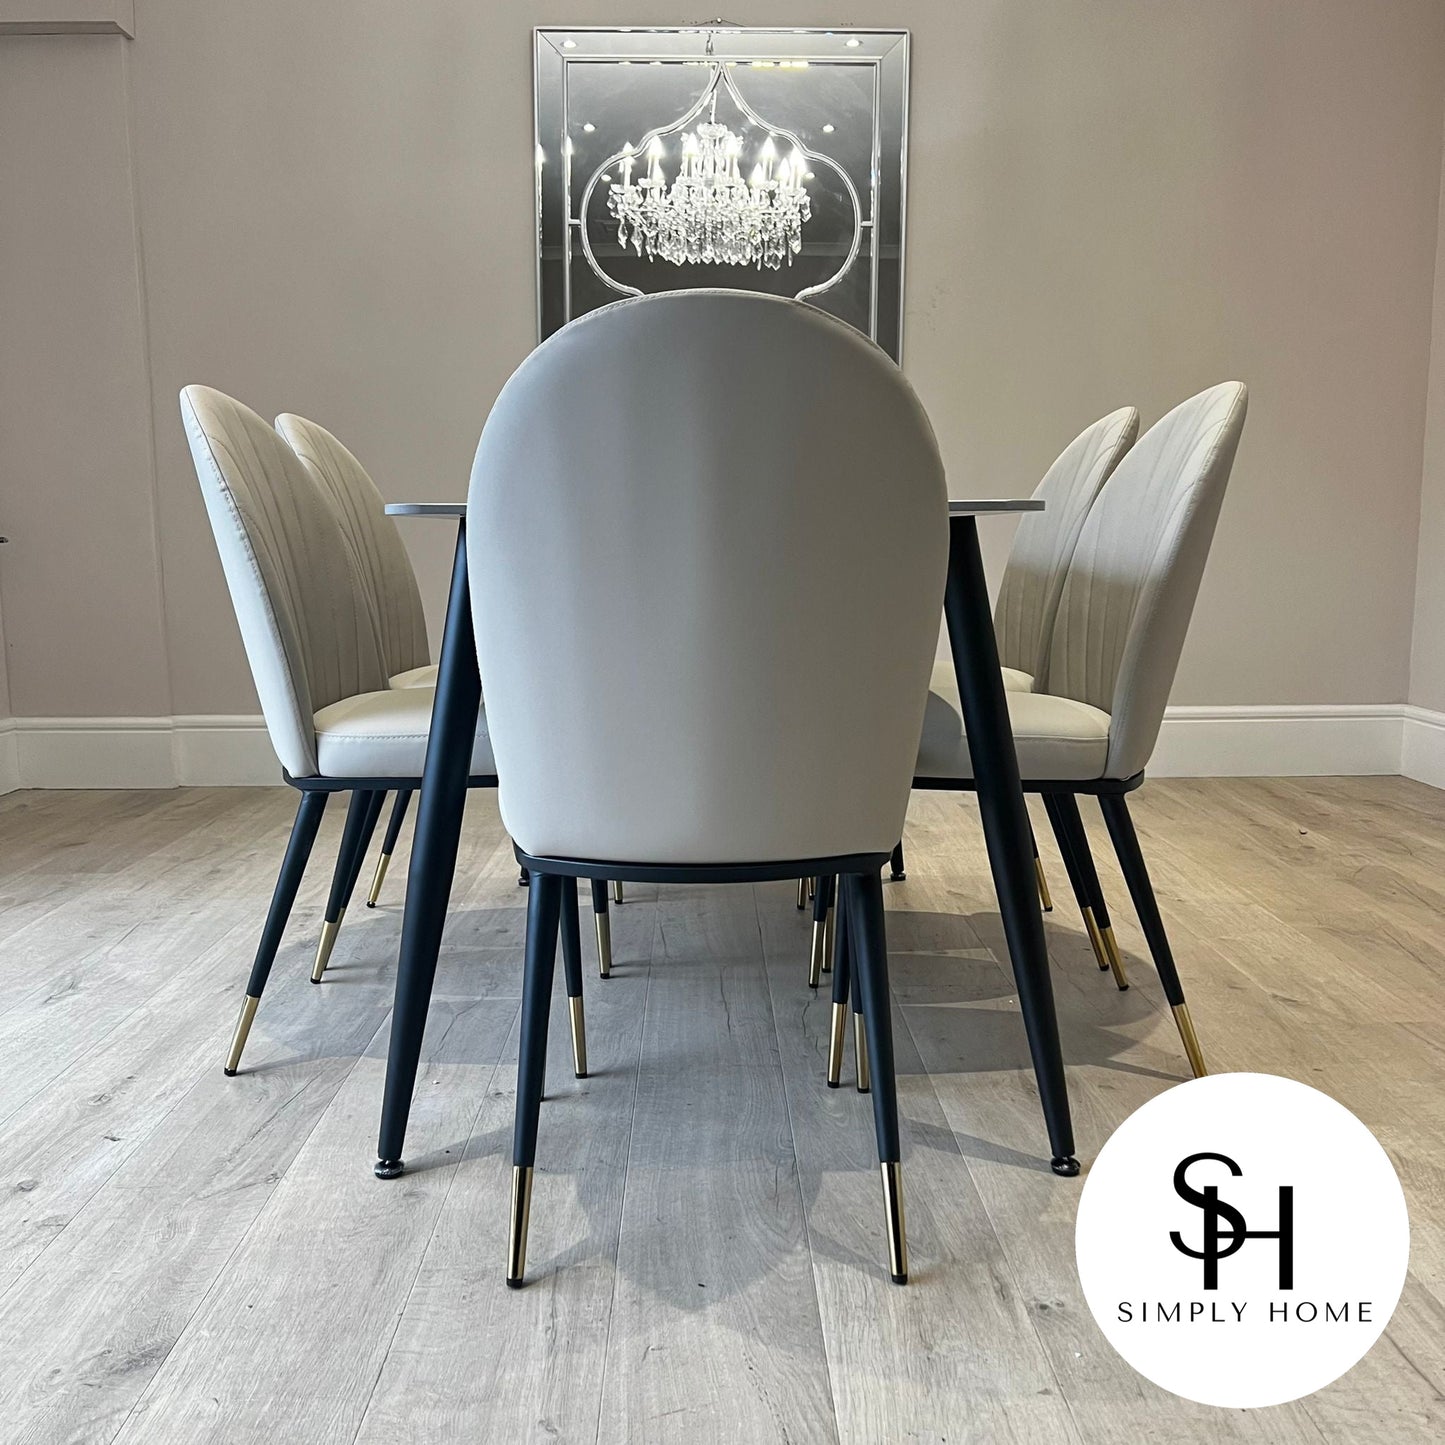 Terra Grey Marble Dining Table with Beige Edra Chairs